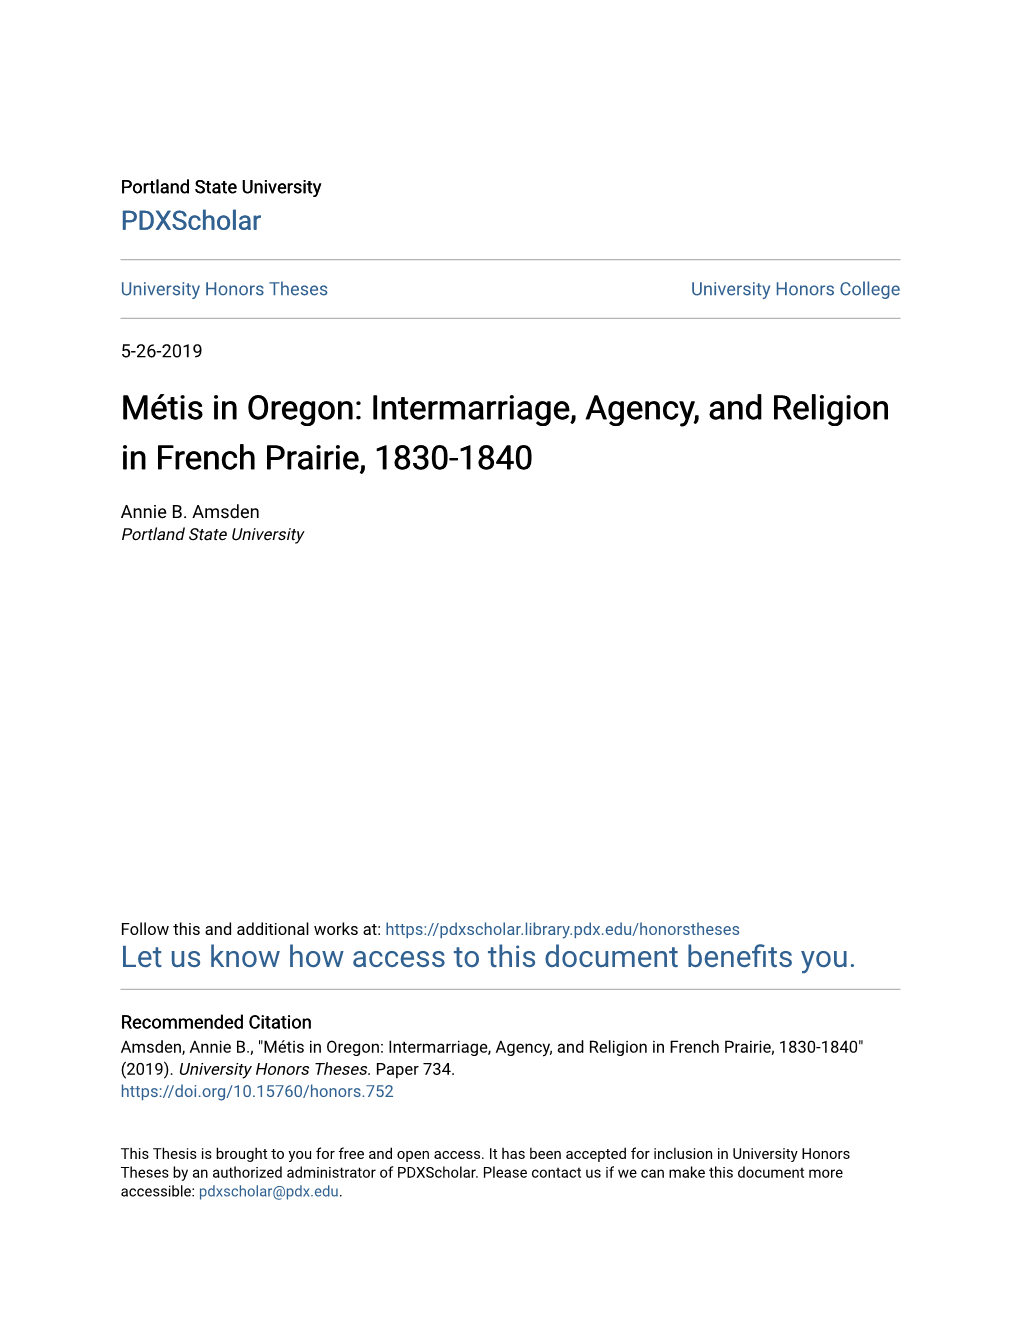 Métis in Oregon: Intermarriage, Agency, and Religion in French Prairie, 1830-1840